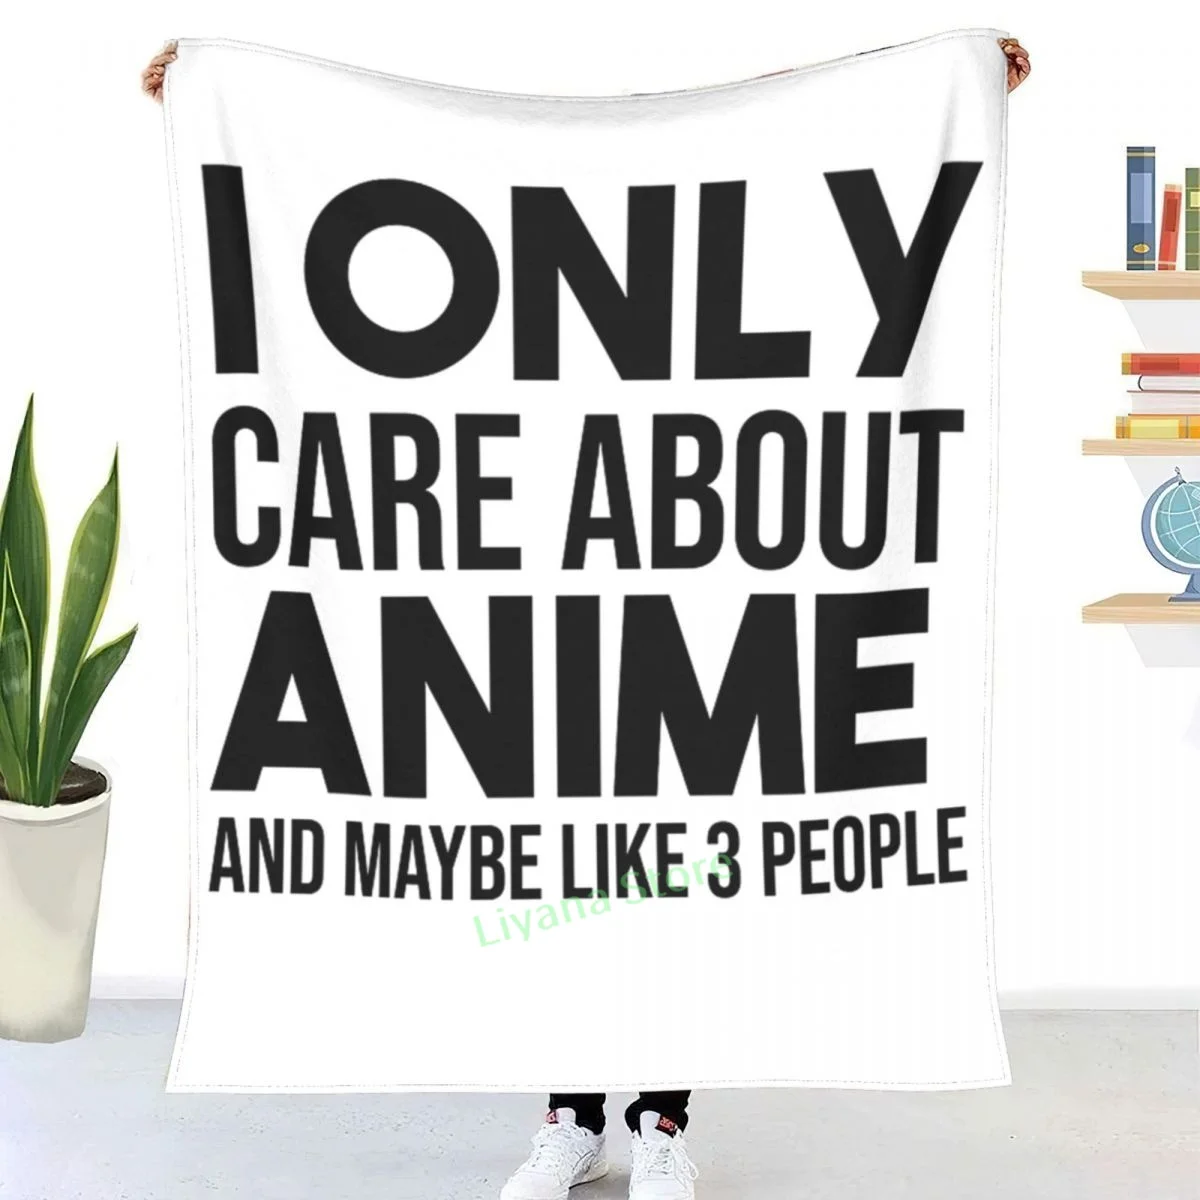 

I Only Care About Anime And Maybe Like 3 People Throw Blanket 3D printed sofa bedroom decorative blanket children adult gift